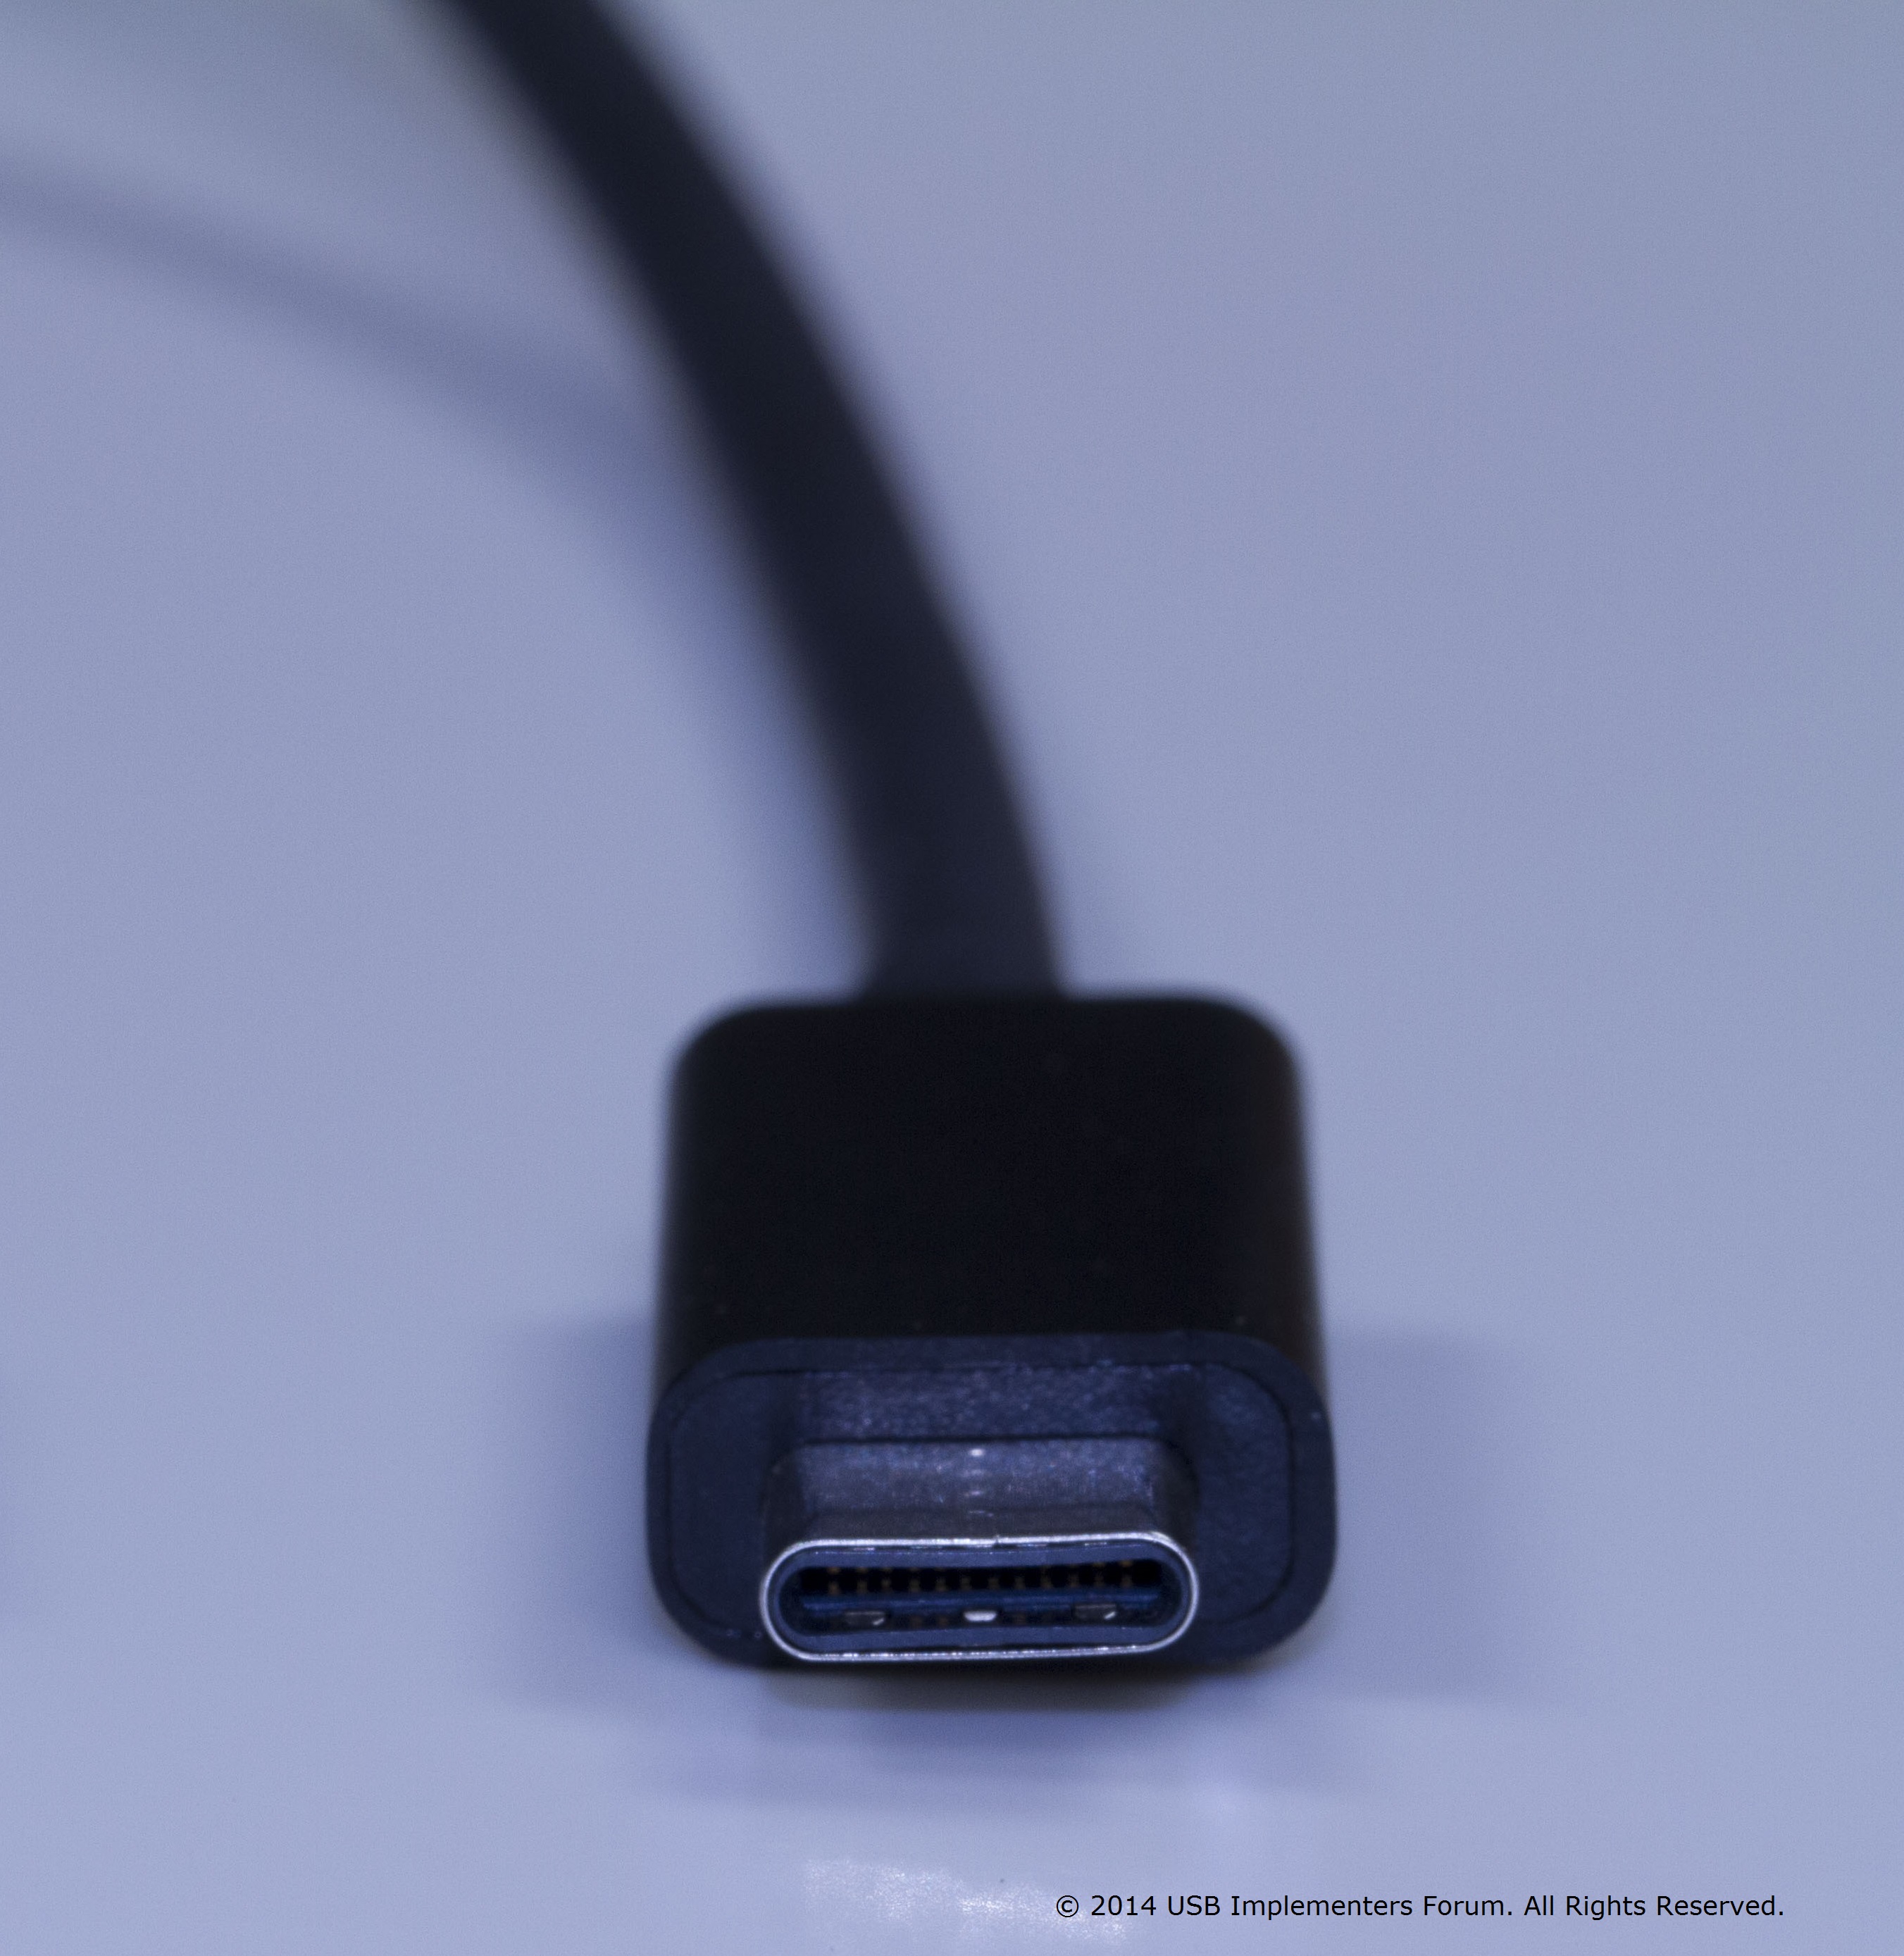 A logo-driven certification program arrives for USB-C chargers